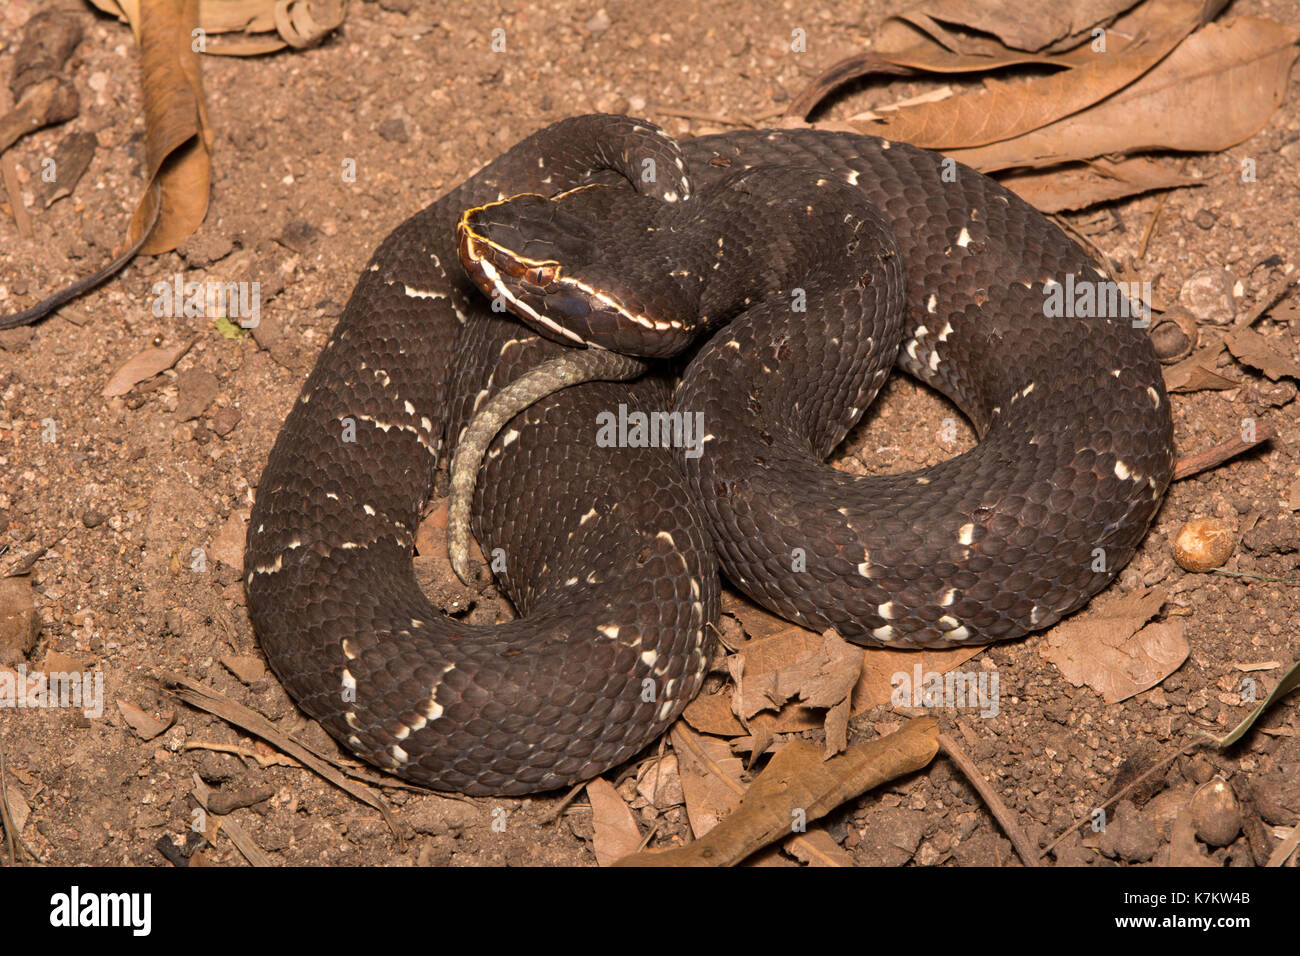 Common Cantil (Agkistrodon bilineatus) from Sonora, Mexico. Stock Photo